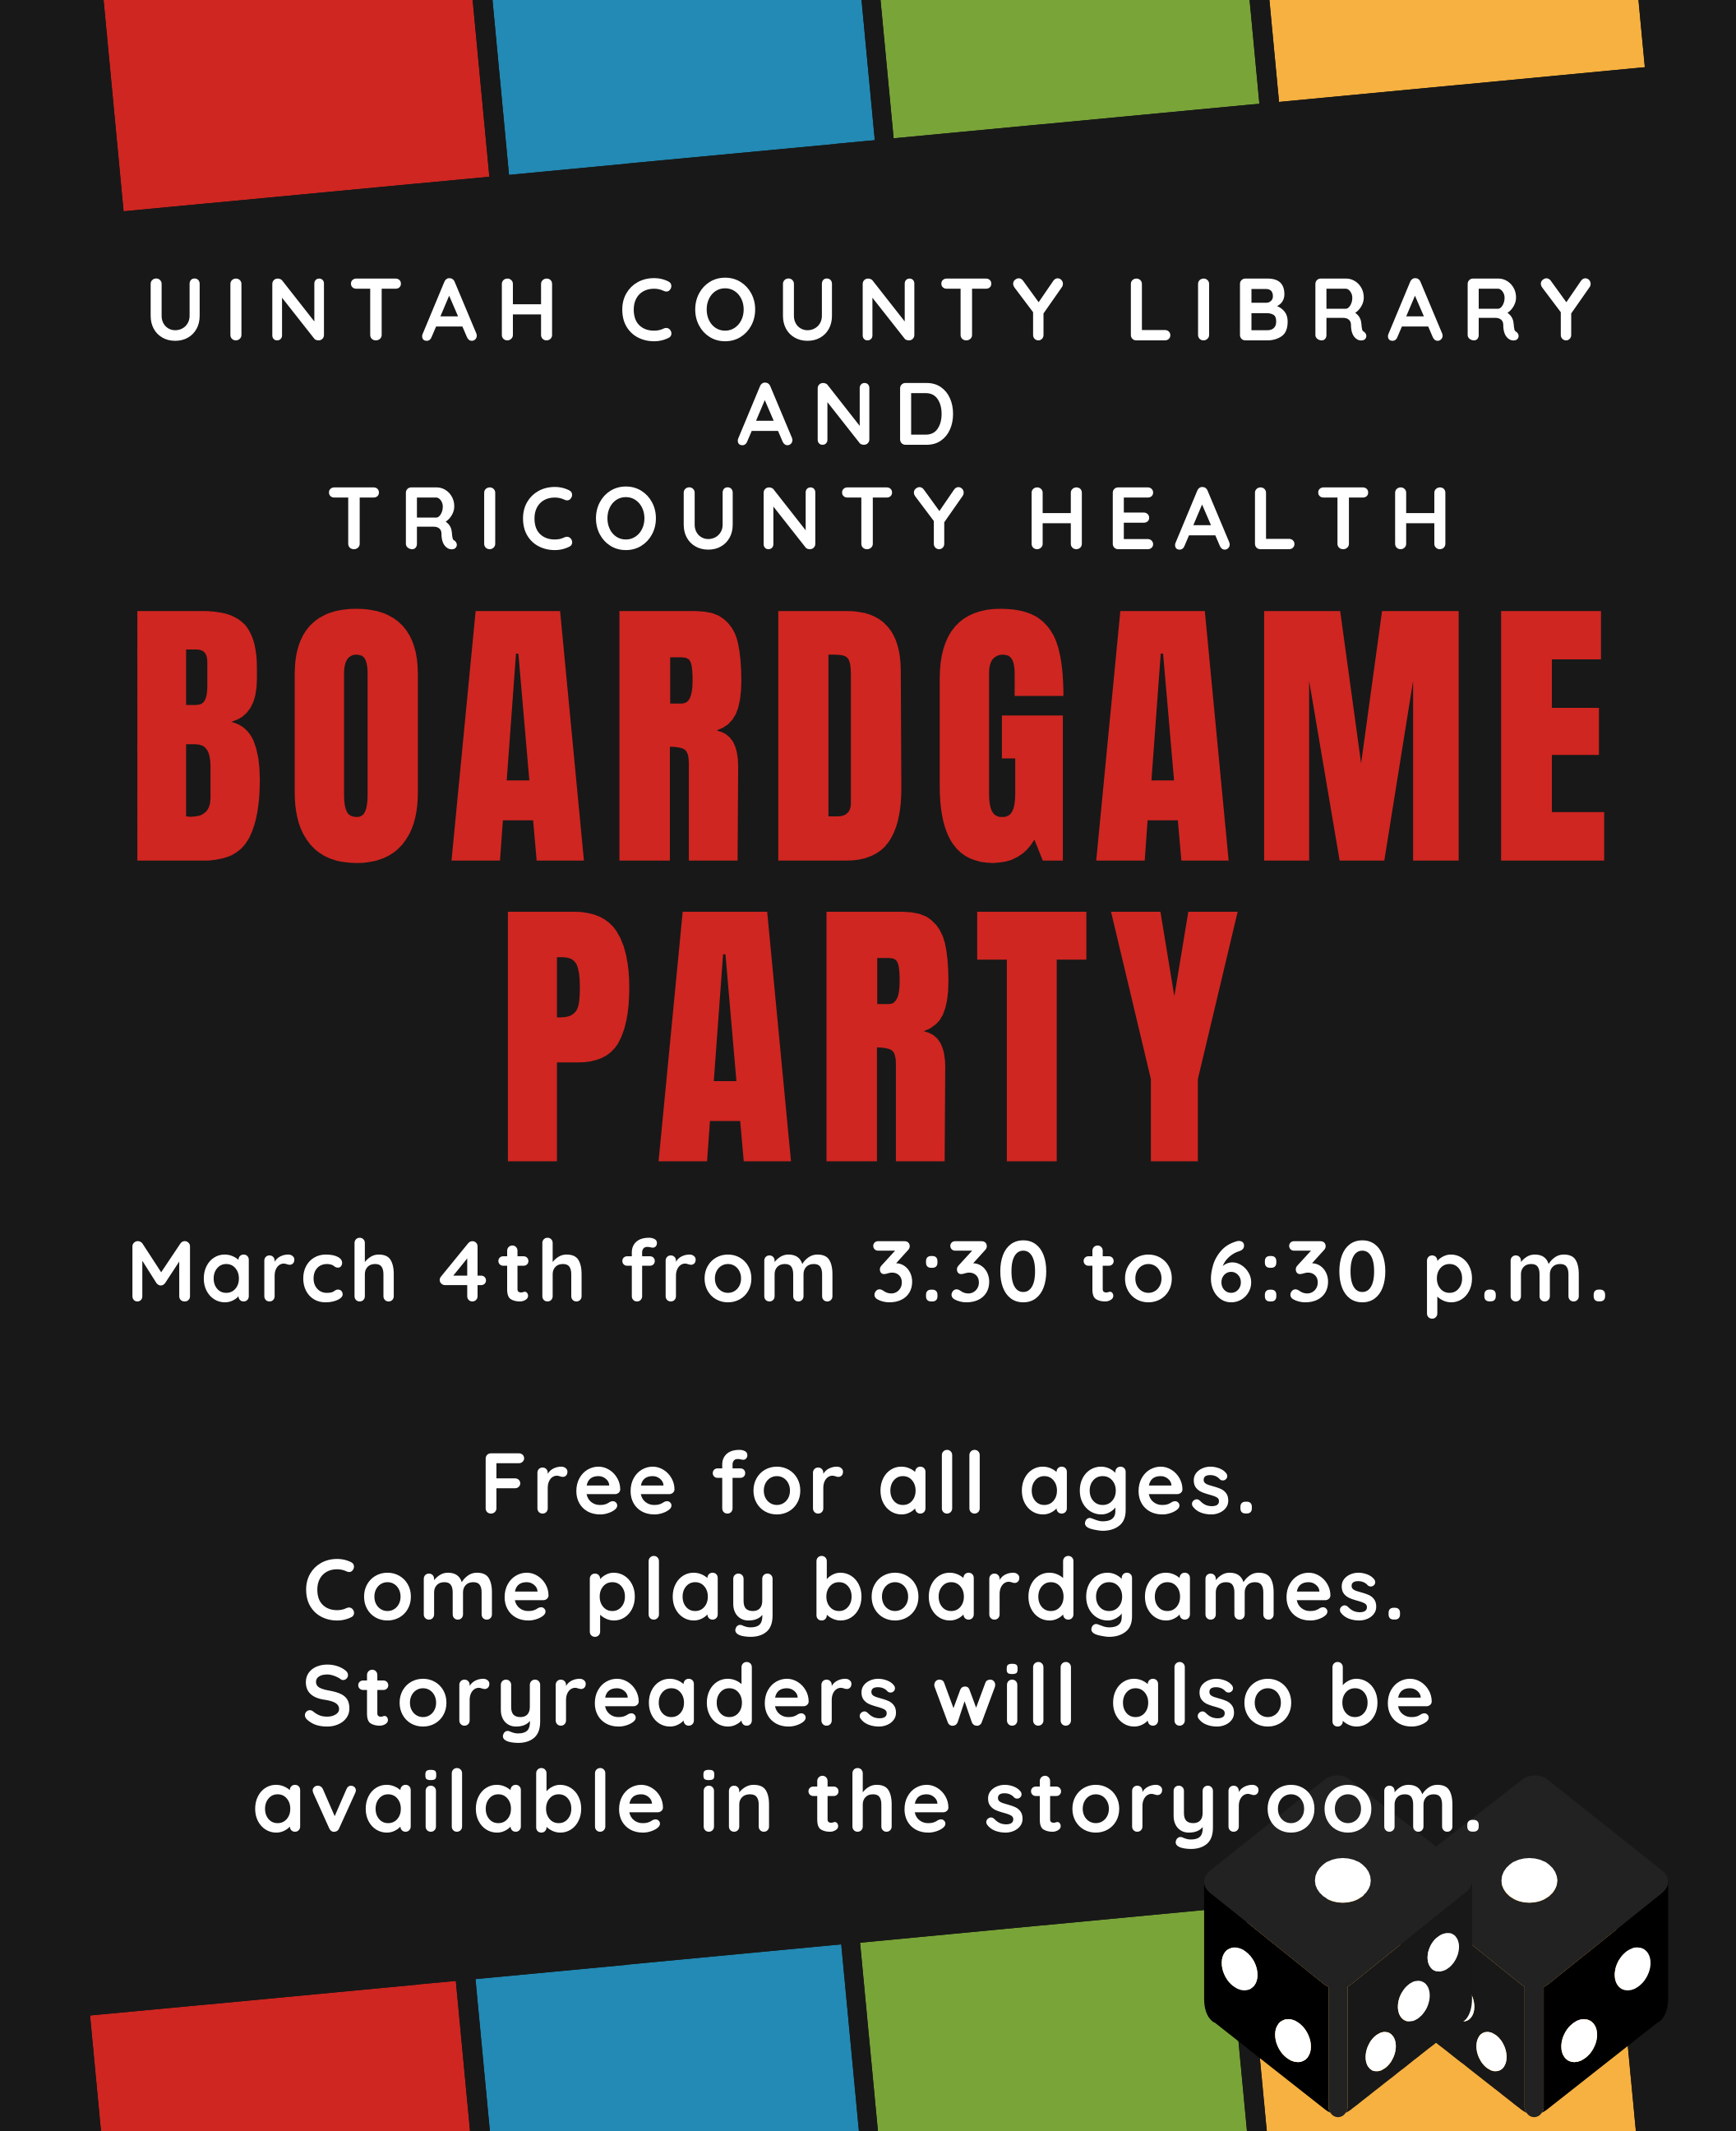 Uintah County Library and Tricounty Health: Boardgame Party March 4th from 3:30 p.m. to 6:30 p.m. Free for all ages. Come play boardgames. There will also be a storyreader in the storytime room. 